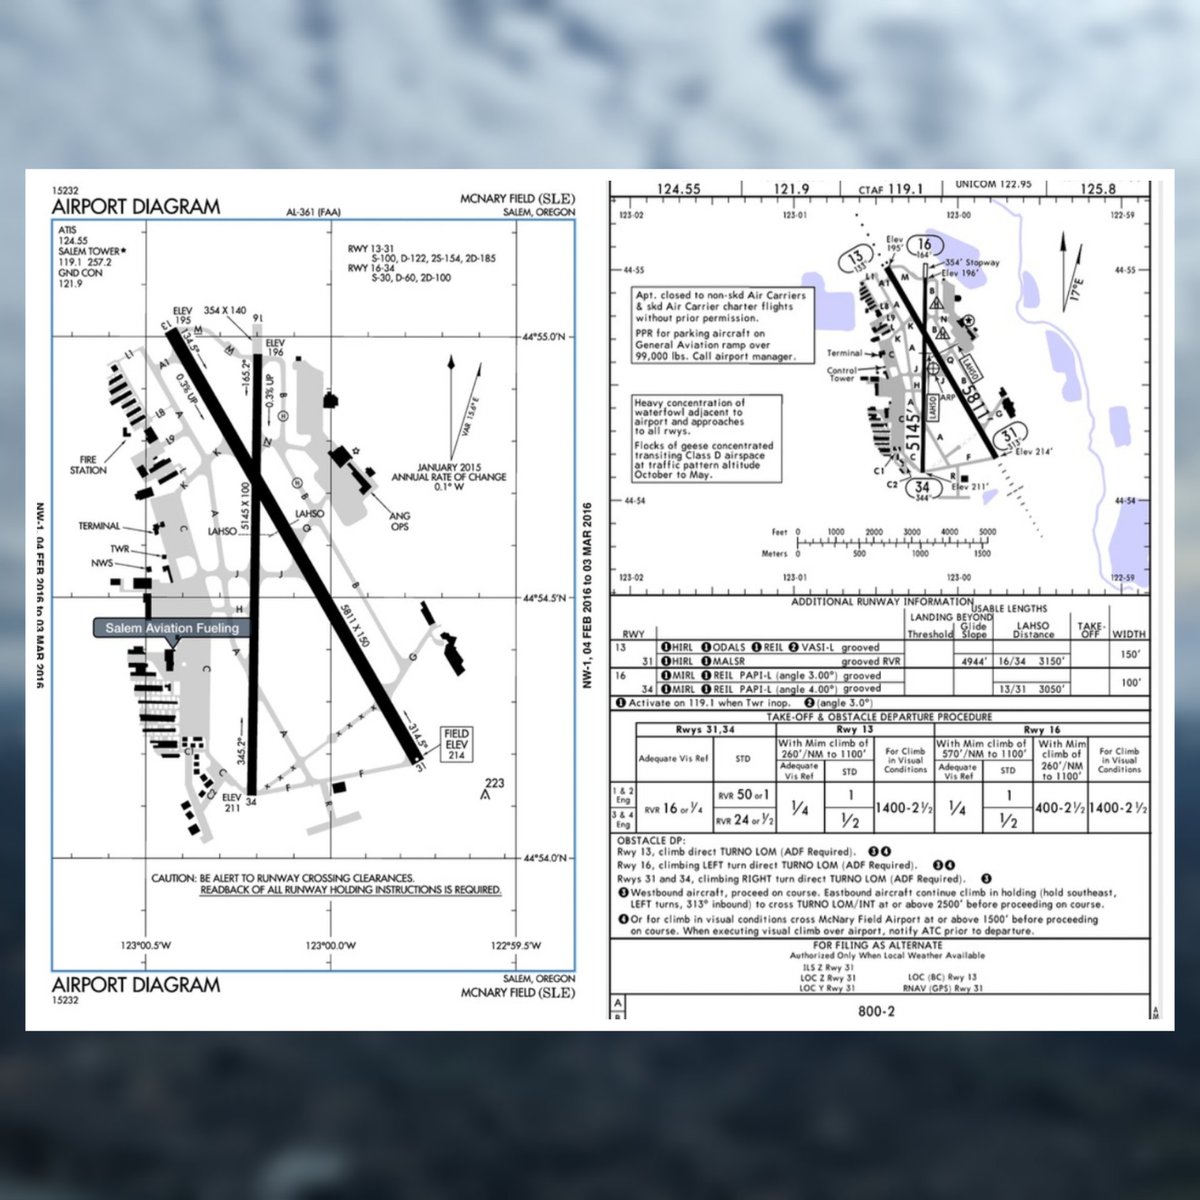 Do you prefer FAA charts or Jeppesen and why? They both have their pros and cons and we want to hear what's important to you! 

#flightschool #pilottraining #planegeek #whyifly #livetofly #avgeek #jeppesen
#faa #instrumenttraining